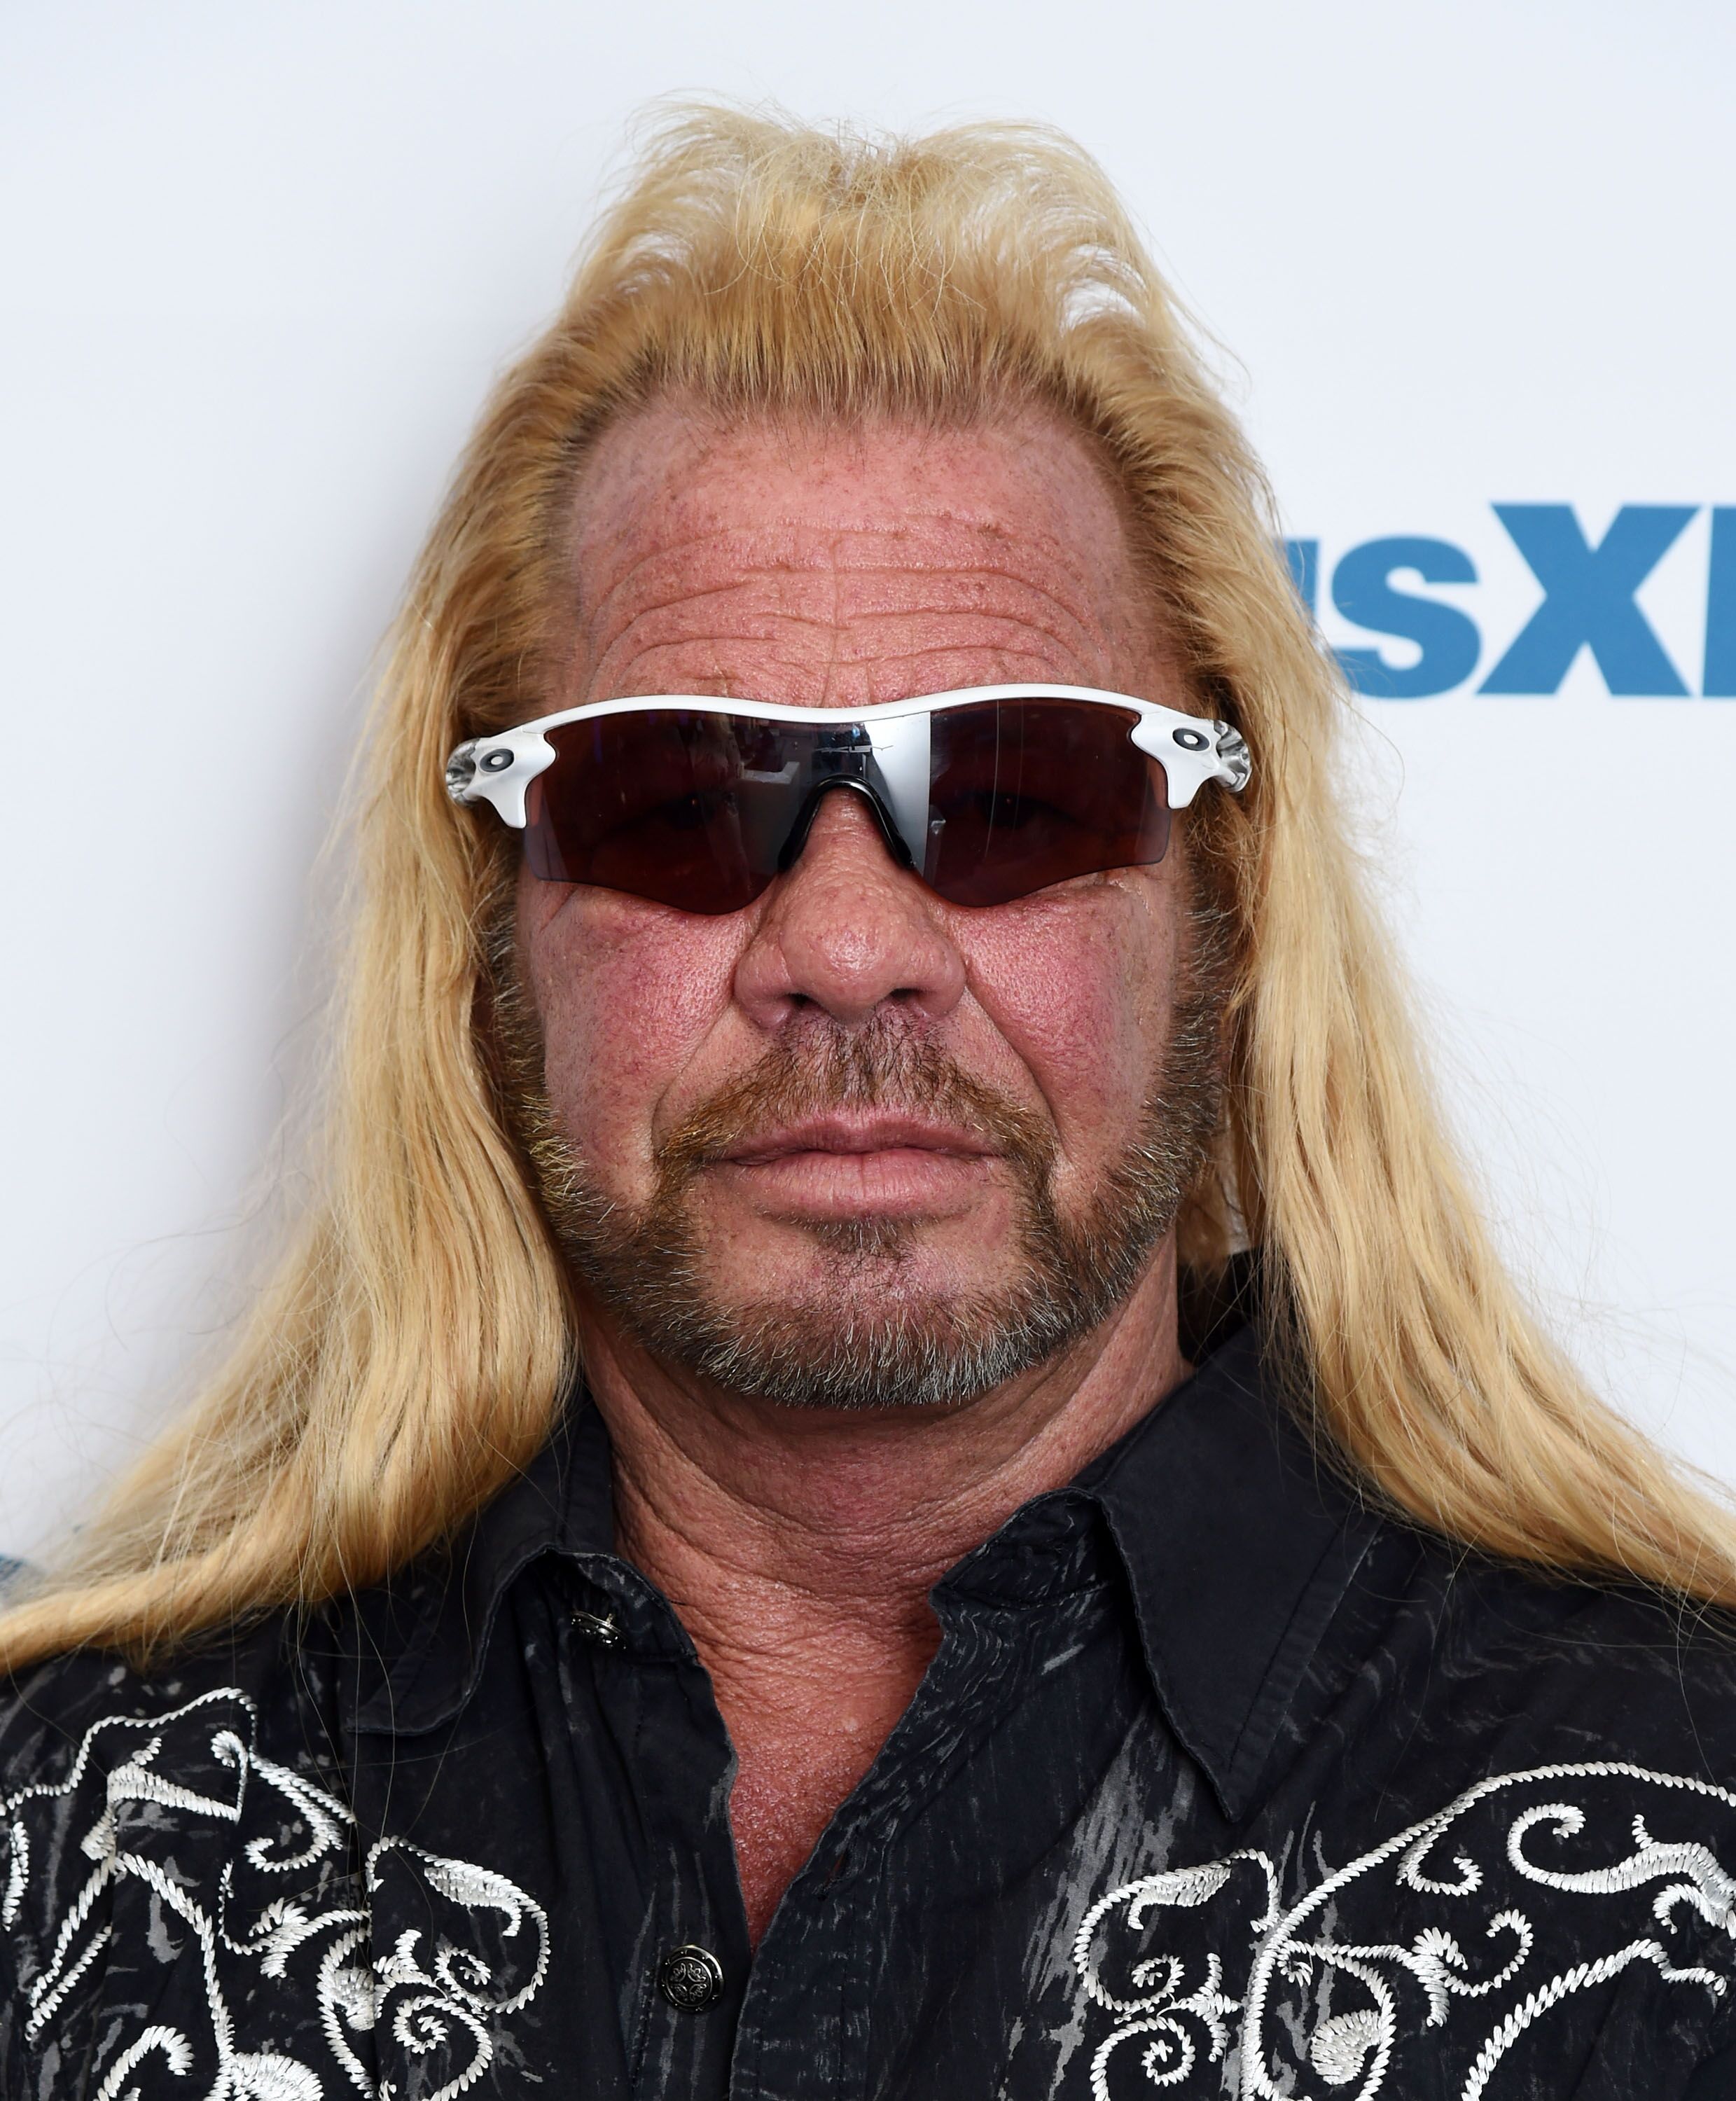 Dog the Bounty Hunter, Duane Chapman visits the SiriusXM Studios on April 24, 2015 in New York City | Photo: Getty Images